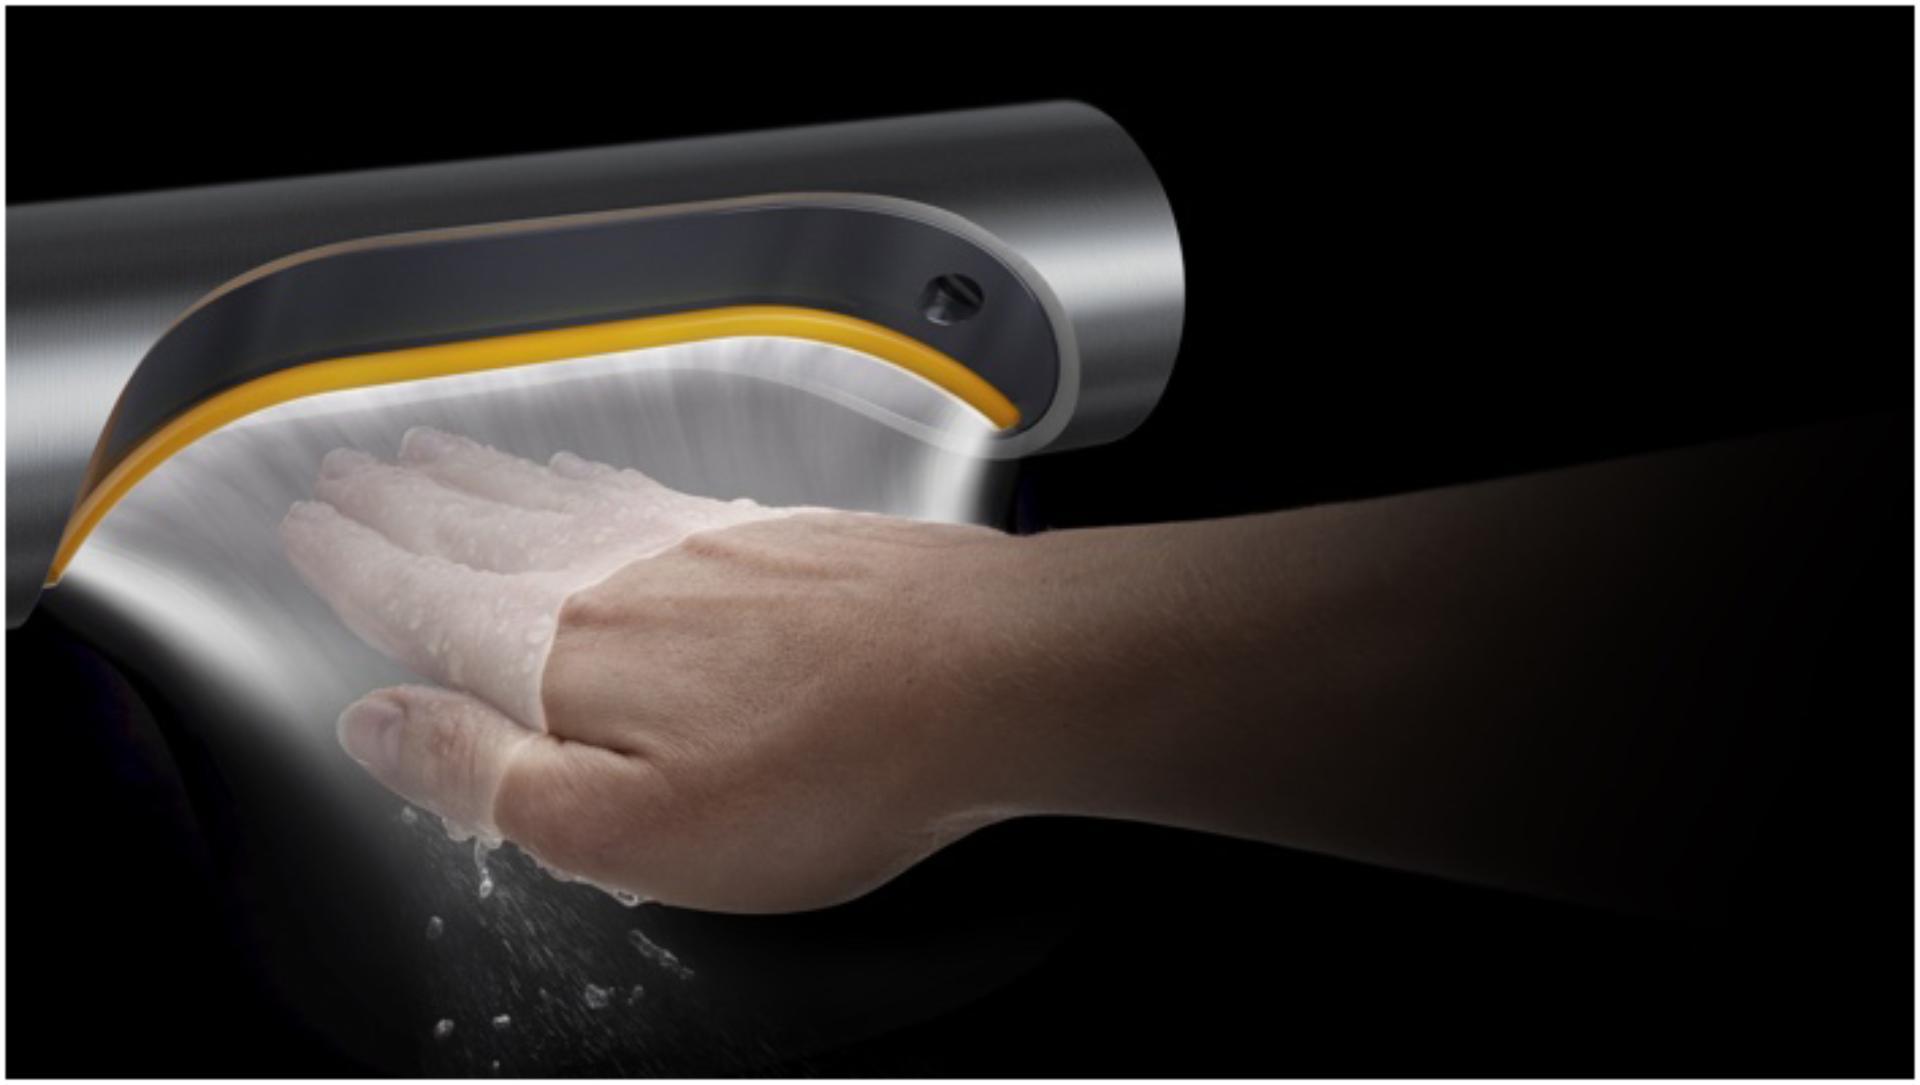 Keeping it Clean and Touch-Free: A Guide to Touch-Free Soap & Sanitizer Dispensers